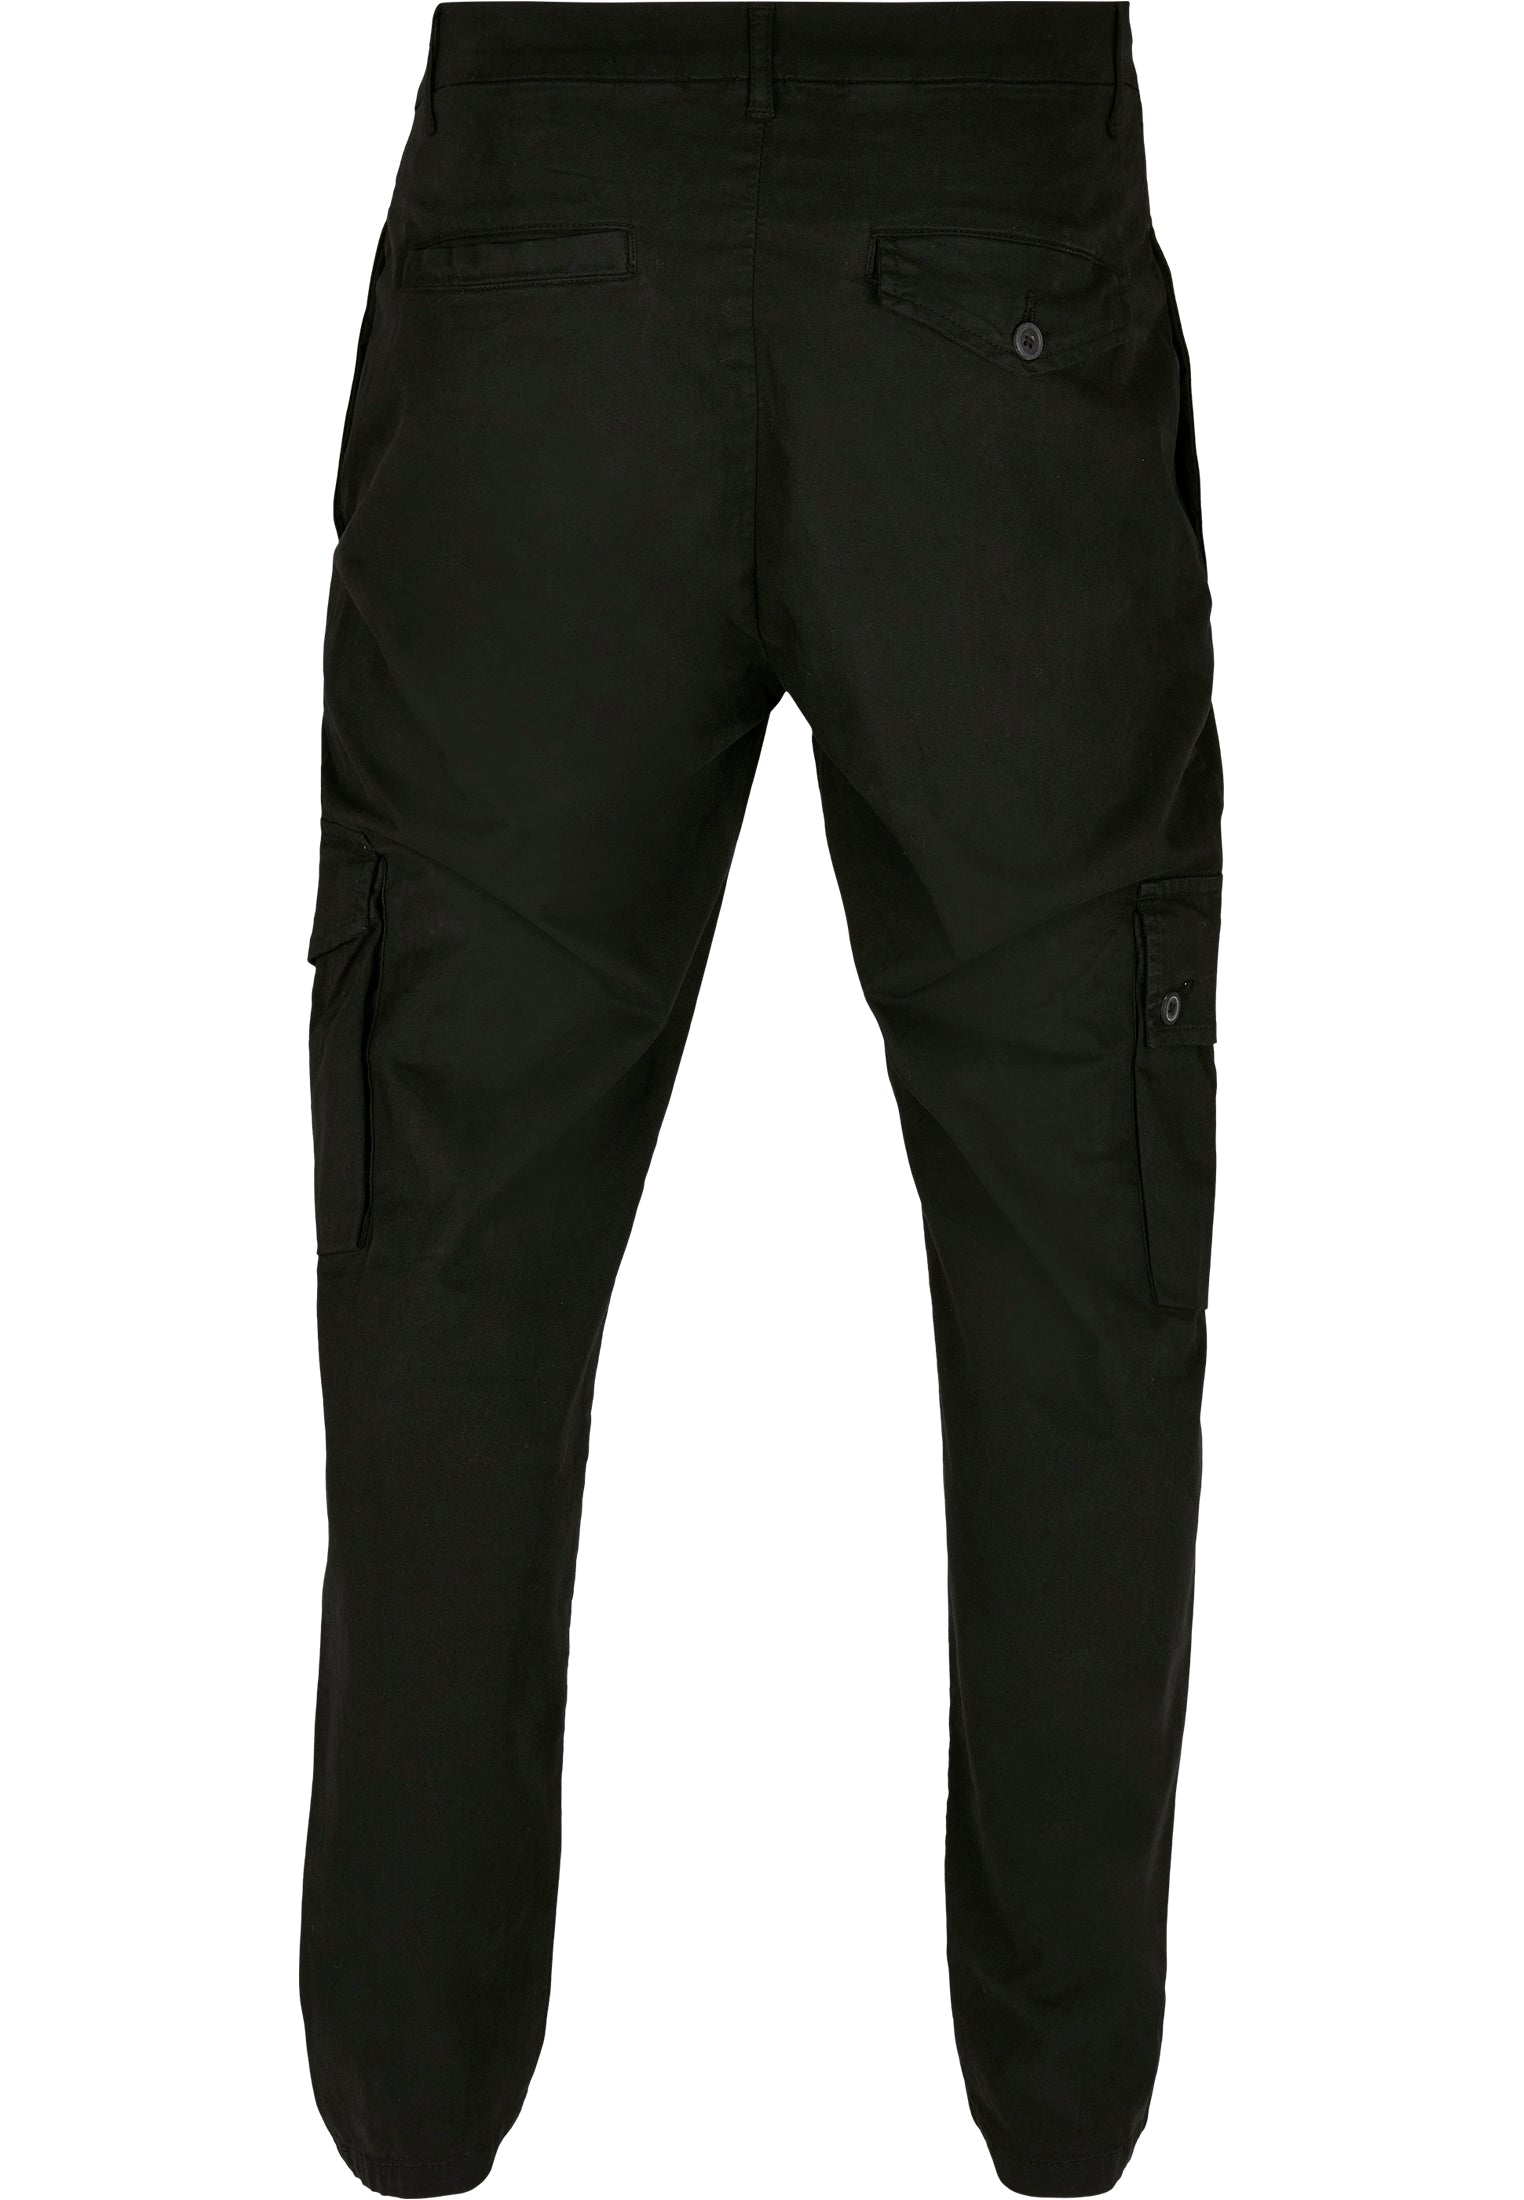 TB 3507 tapered cargo pants